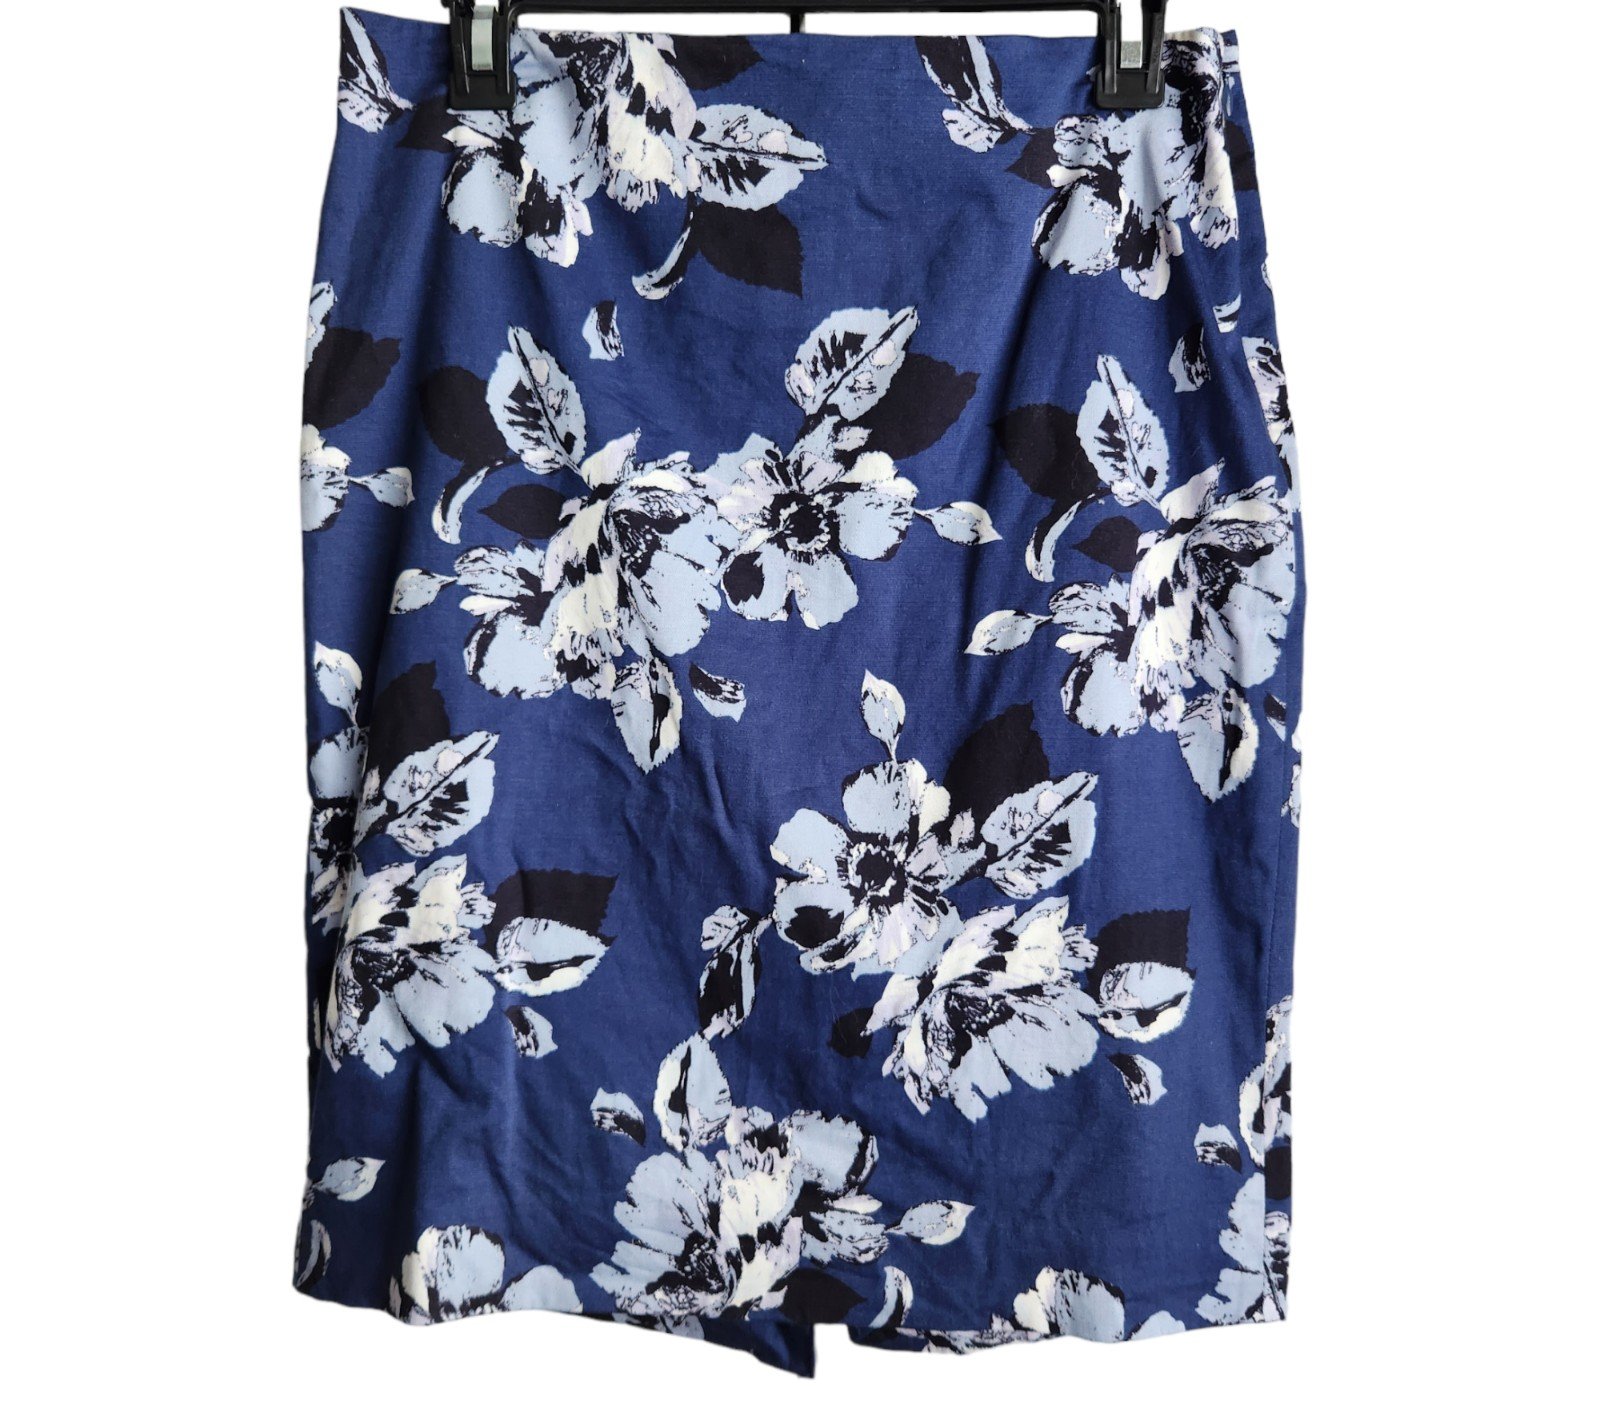 Authentic The Limited Skirt, Size 6, Blue / Floral, Str